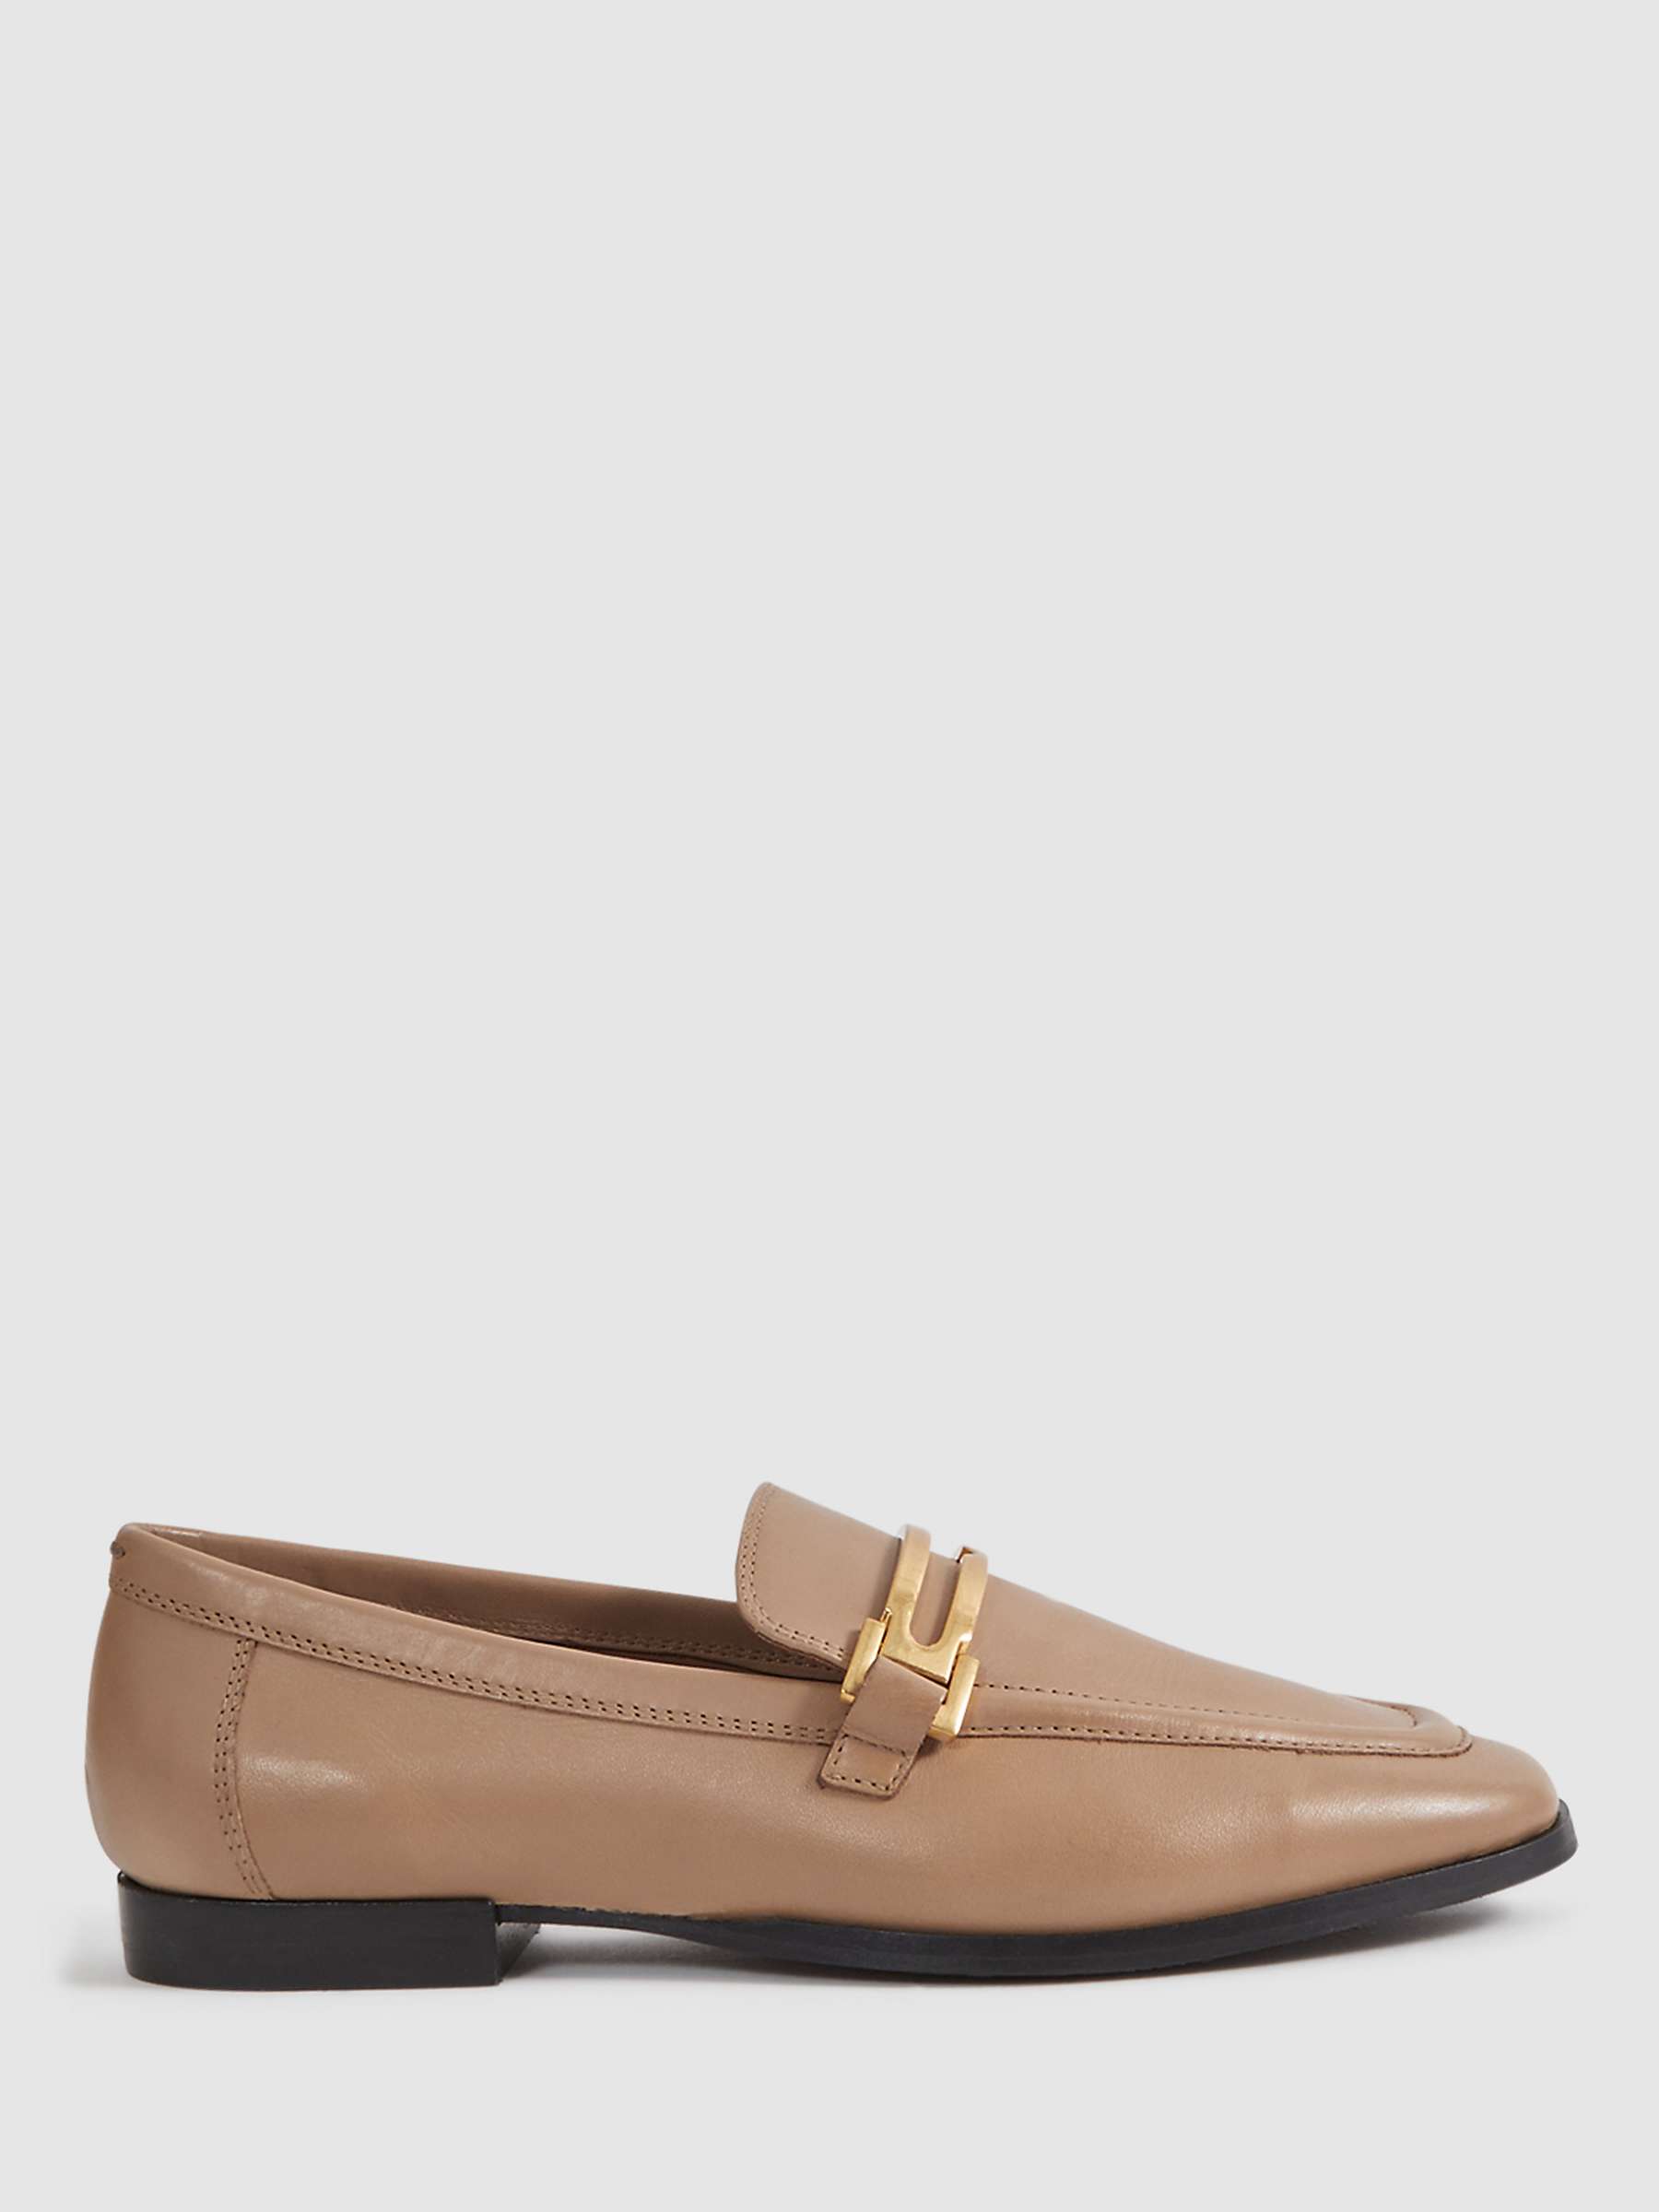 Buy Reiss Angela Metal Trim Leather Loafers Online at johnlewis.com